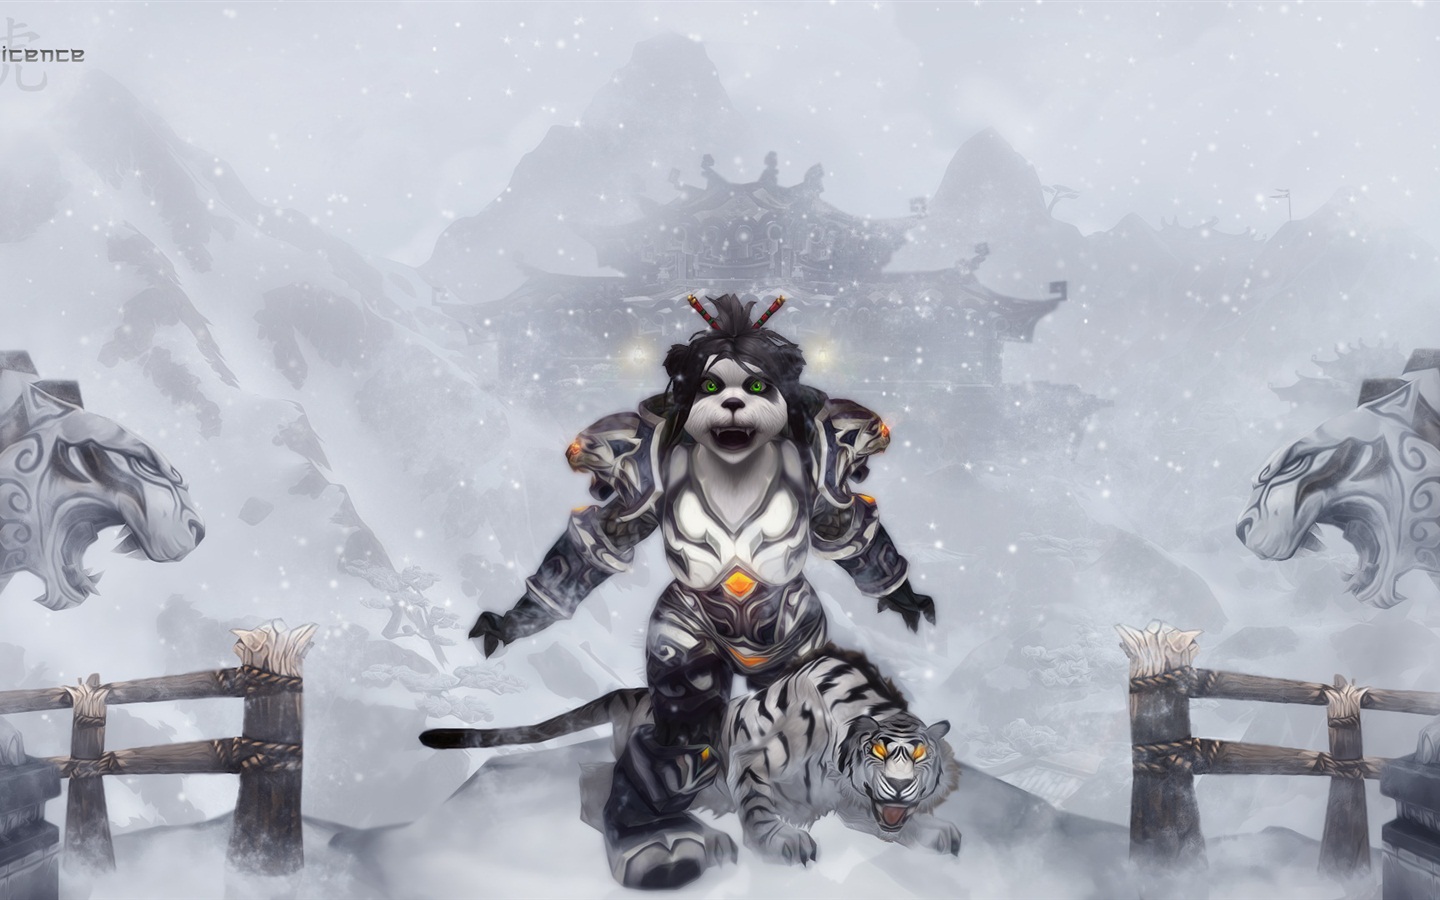 World of Warcraft: Mists of Pandaria HD wallpapers #4 - 1440x900